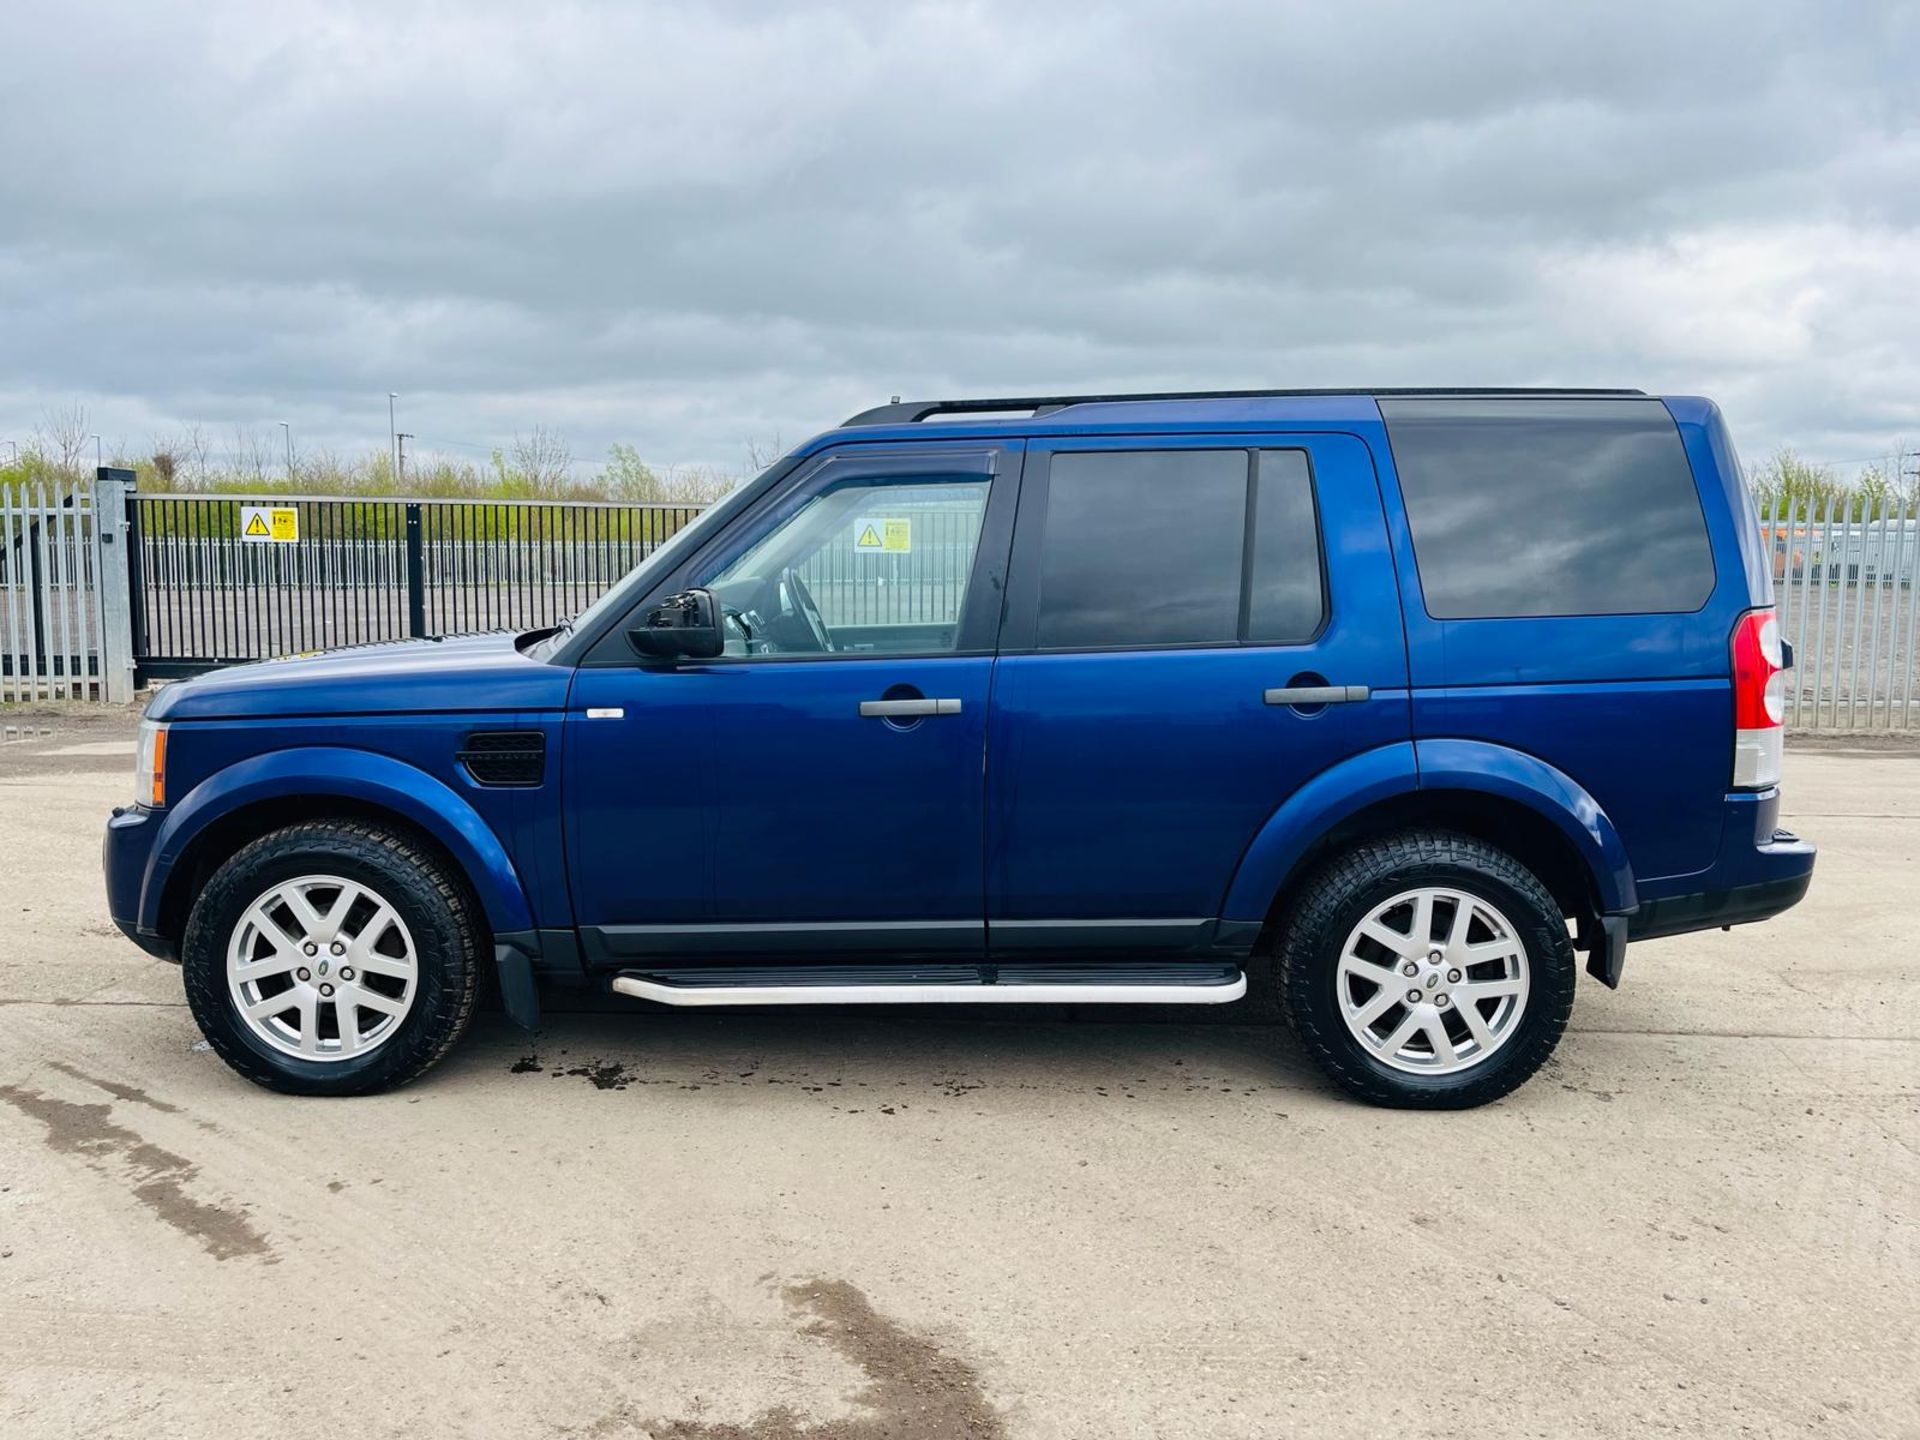 ** ON SALE ** Land Rover Discovery 4 2.7 TDV6 Commercial Van Auto -A/C-Sat Nav-Bluetooth Handsfree - Image 4 of 31